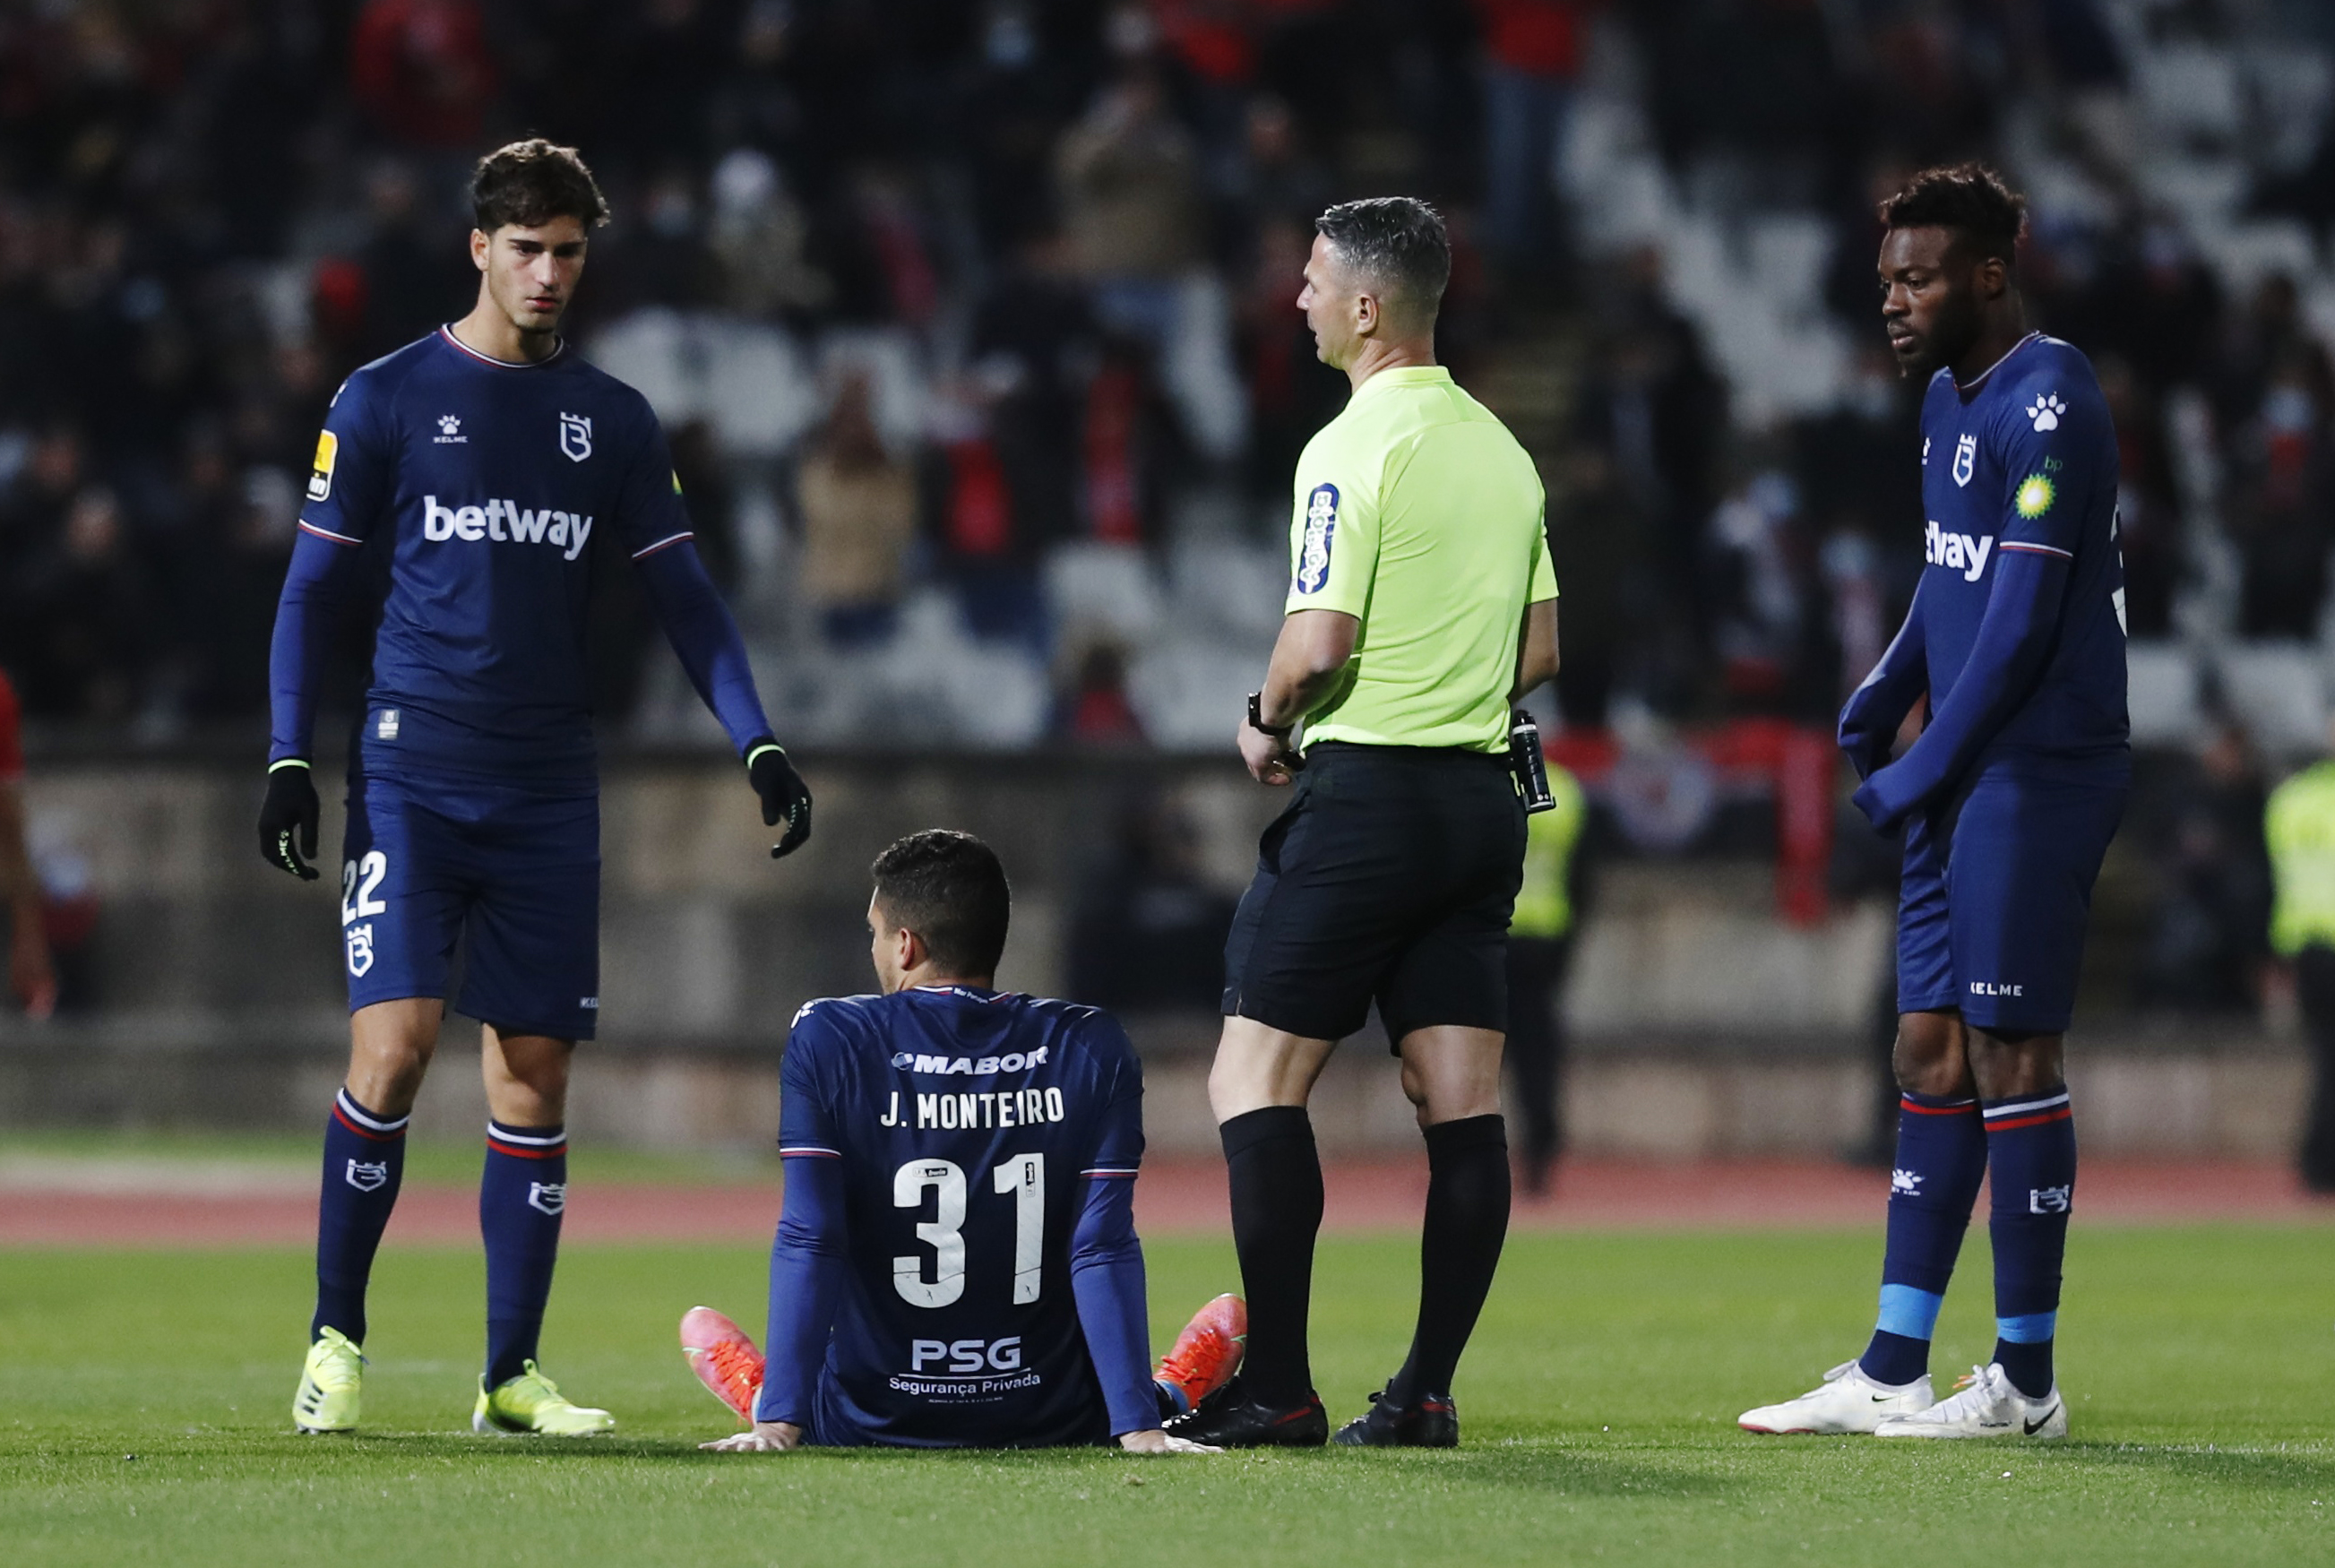 Soccer Football - Primeira Liga - Belenenses v Benfica - Estadio Nacional, Oeiras, Portugal - November 27, 2021 Referee Manuel Mota ends the match early after Belenenses started the match with 9 players due to a COVID-19 outbreak in the club and Joao Monteiro sustains an injury REUTERS/Pedro Nunes